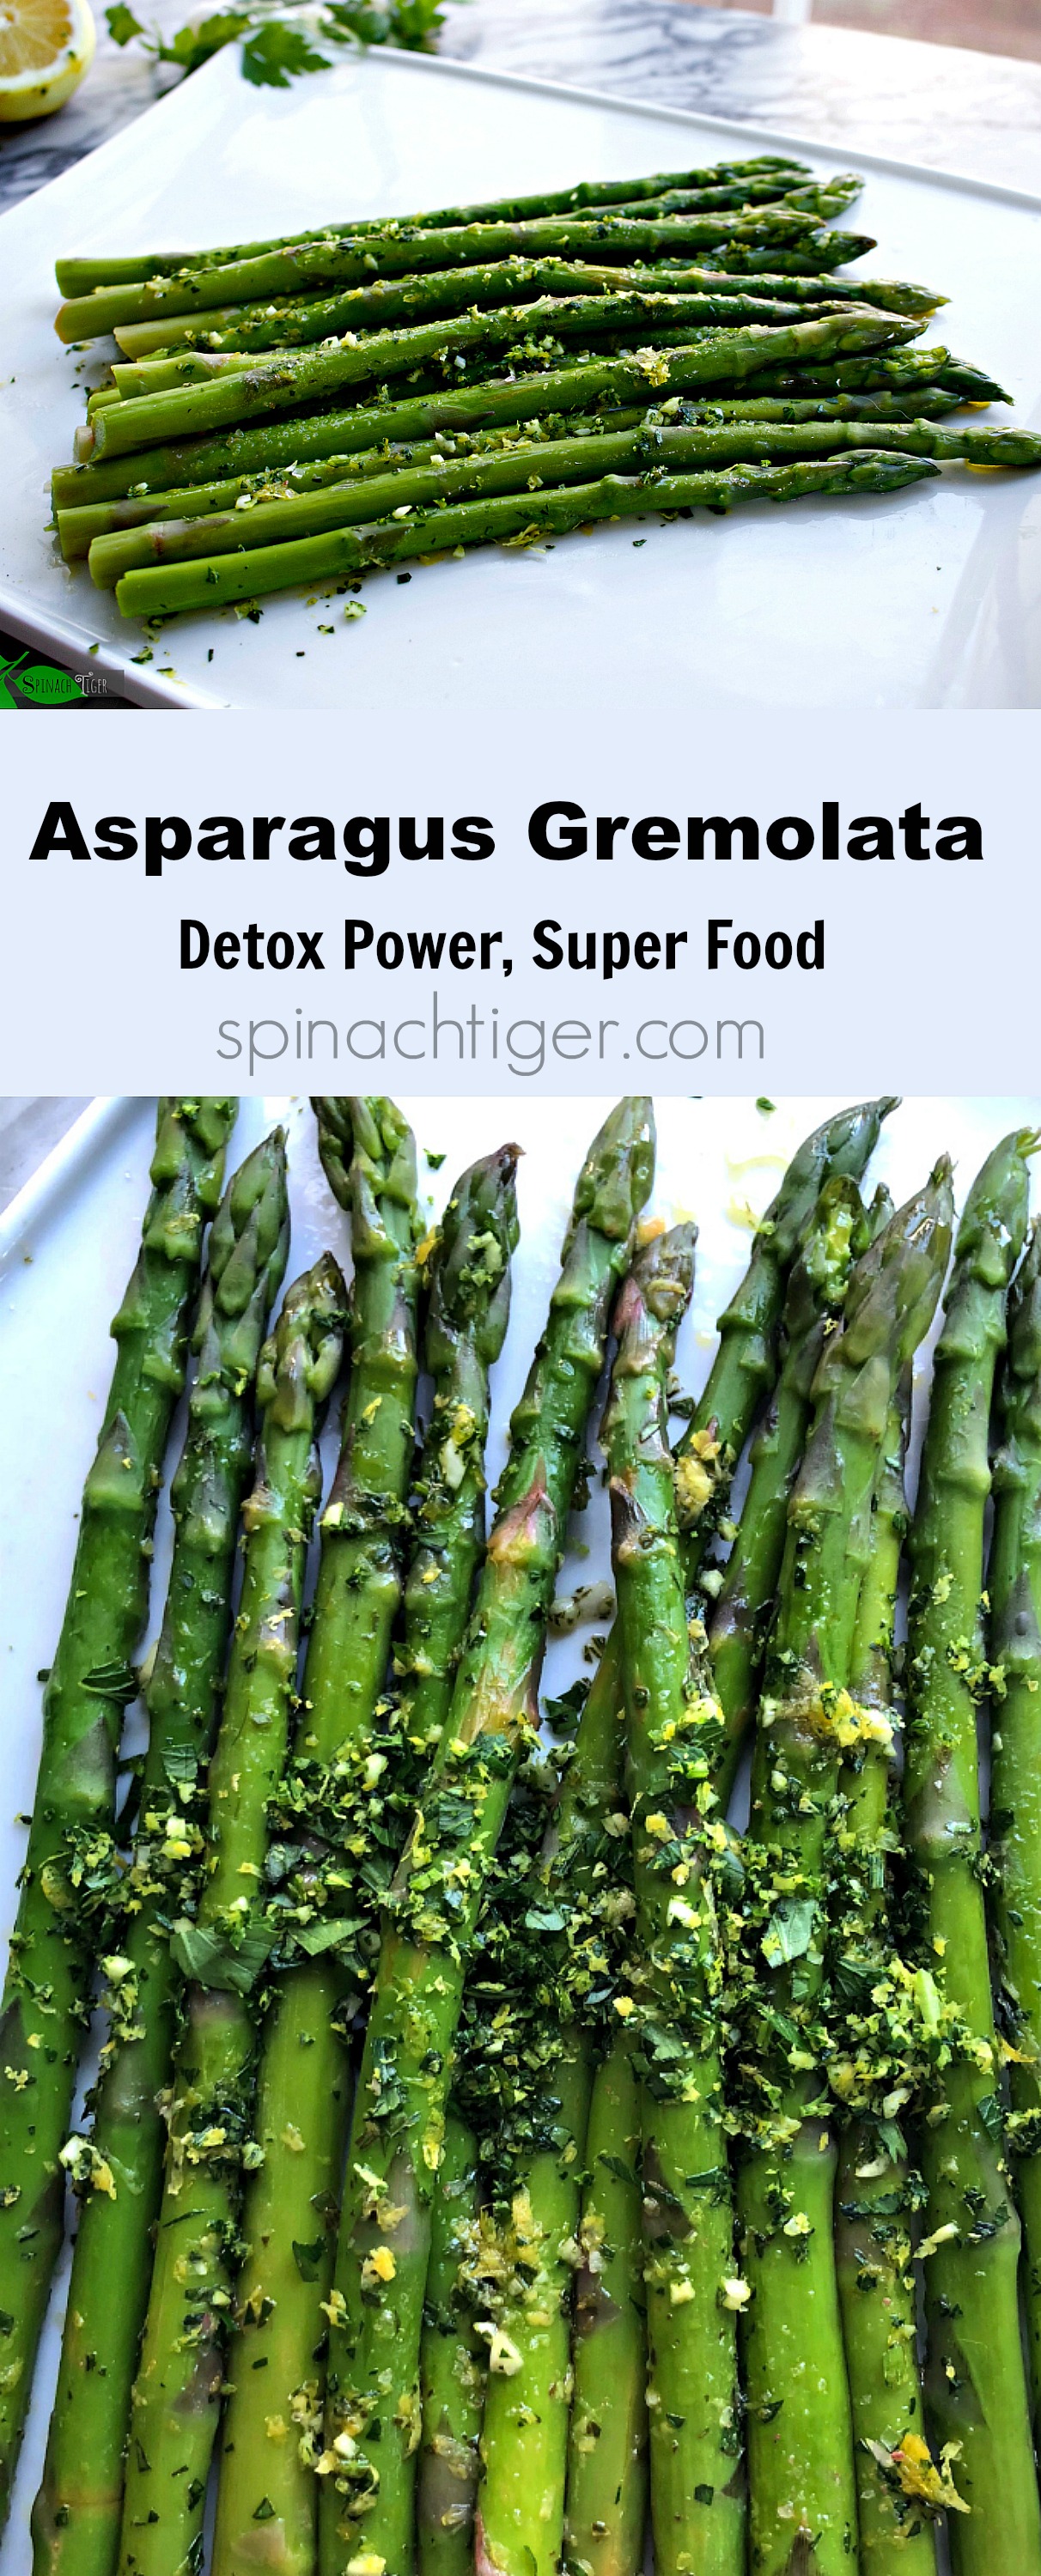 Asparagus Gremolata, Benefits of Asparagus, Detox Superfood, from Spinach Tiger